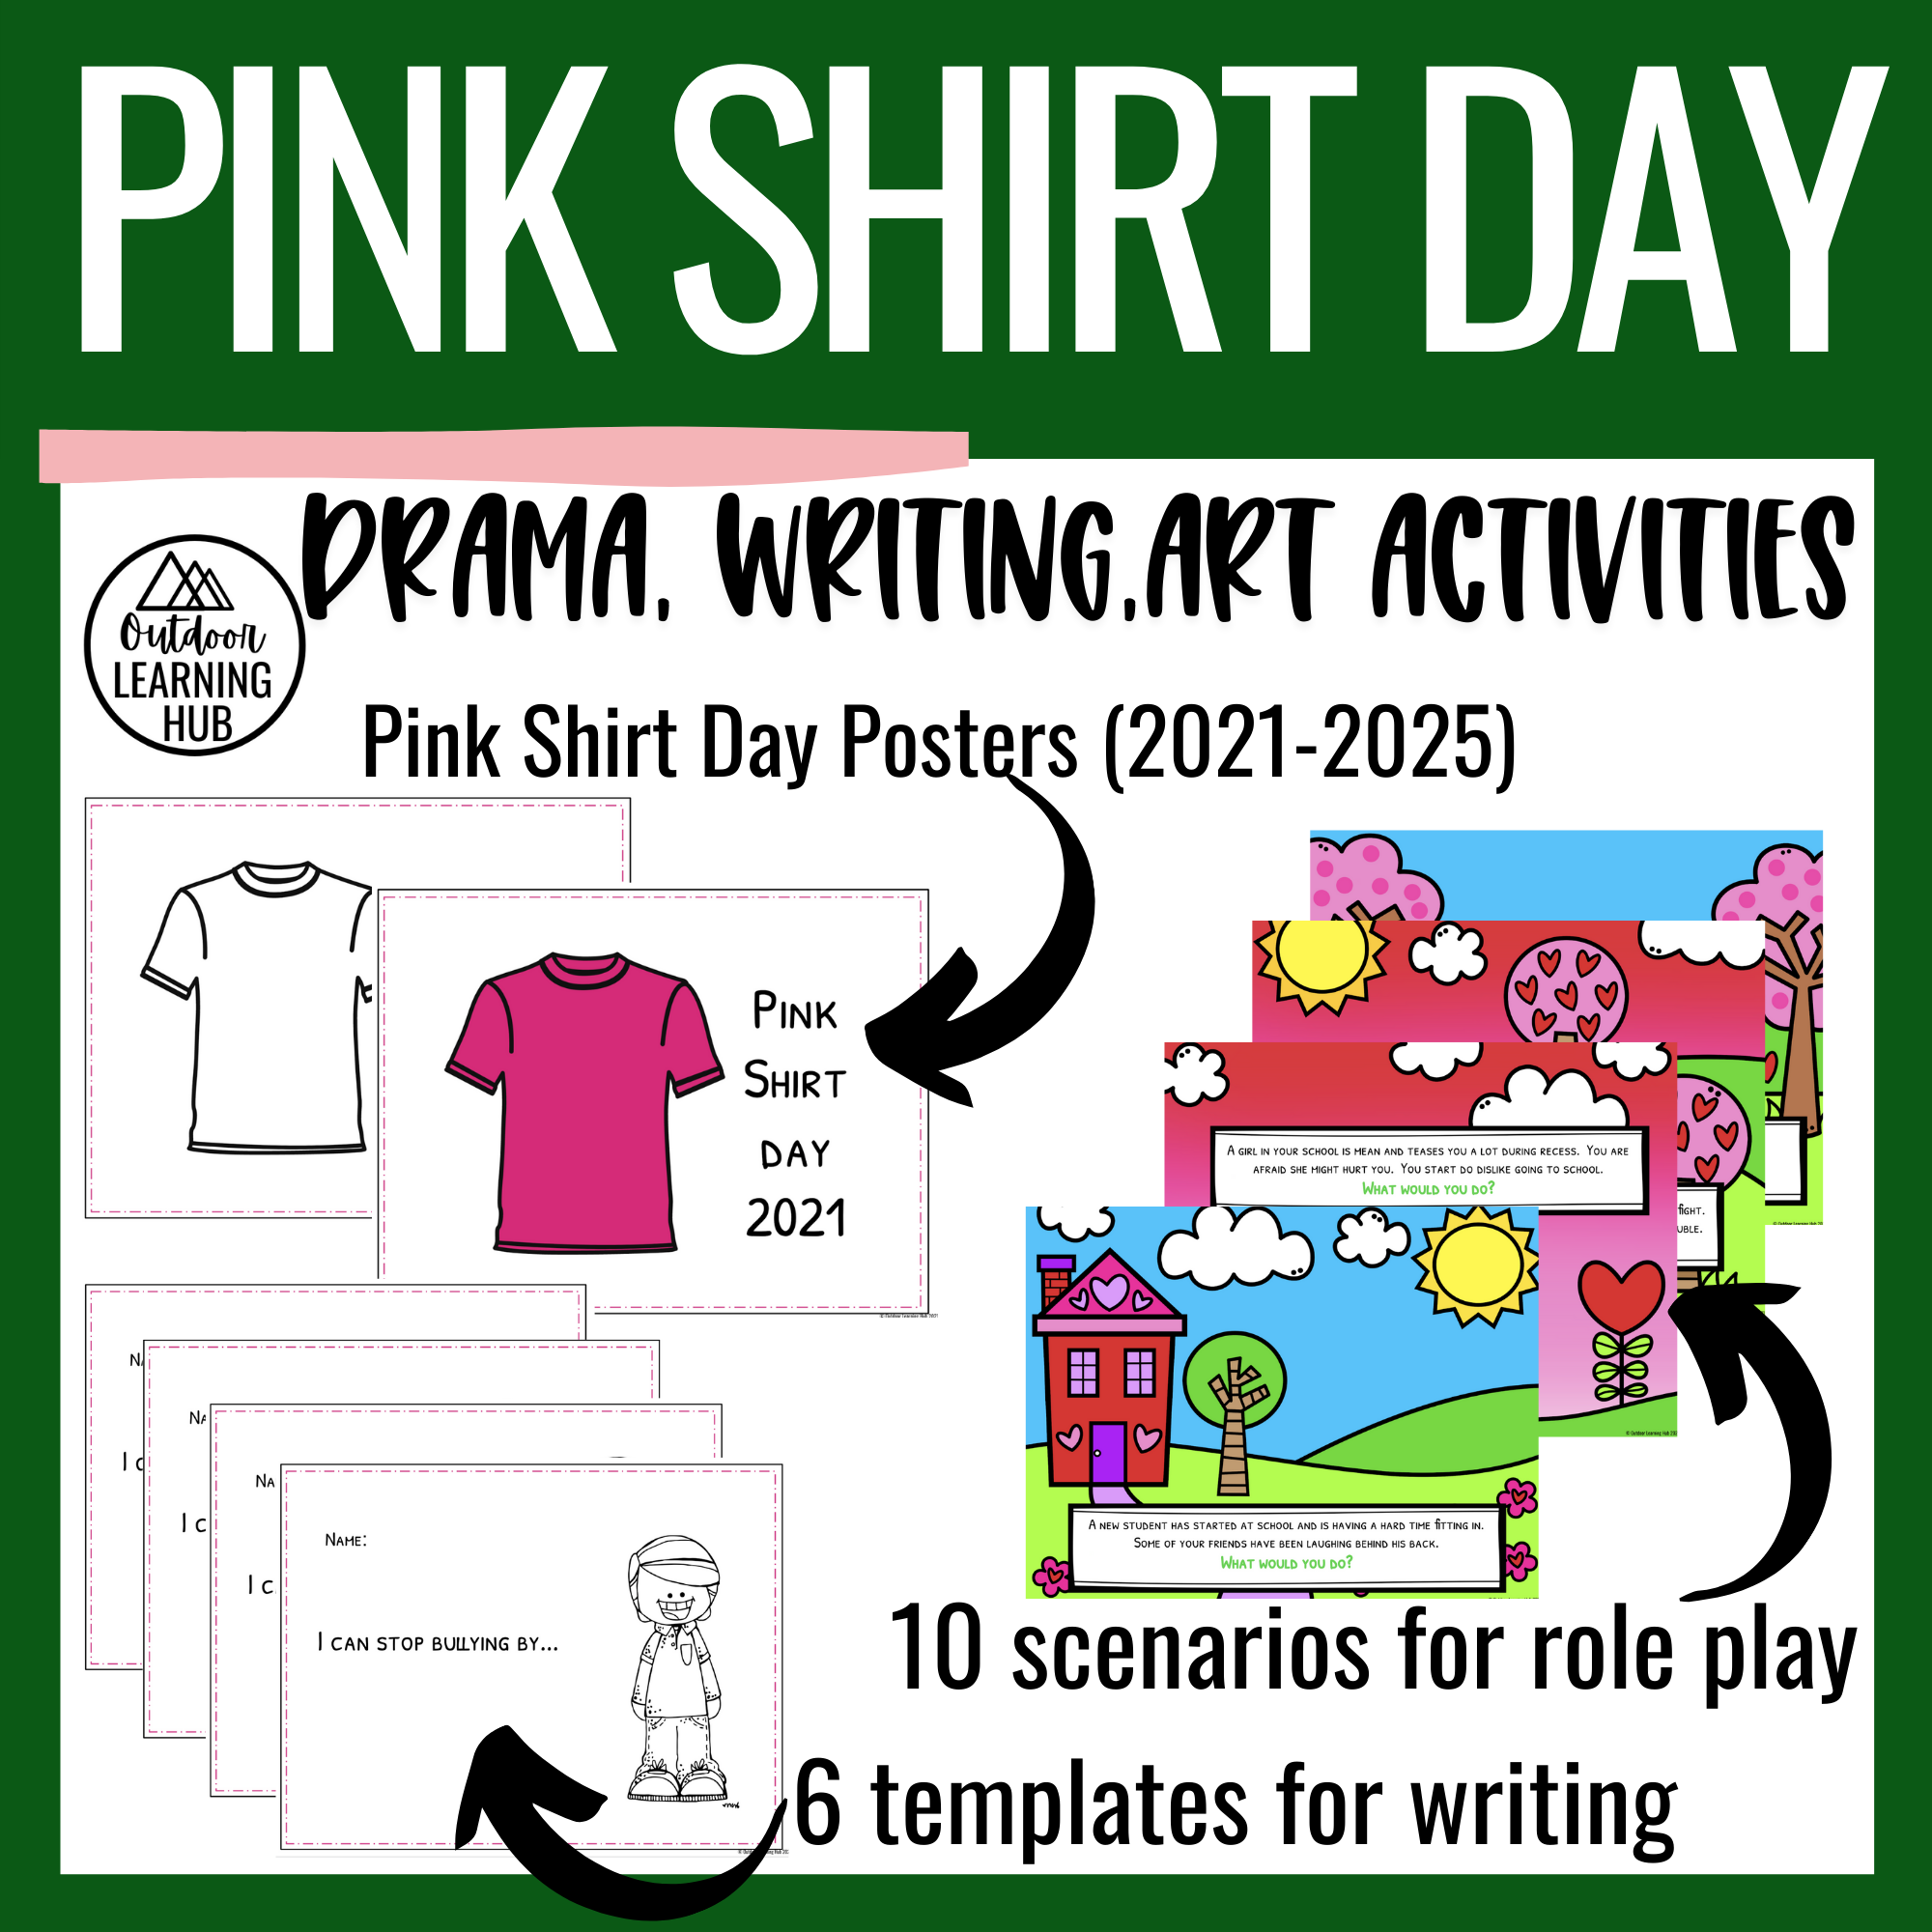 primary-pink-shirt-day-activities-outdoorlearninghub